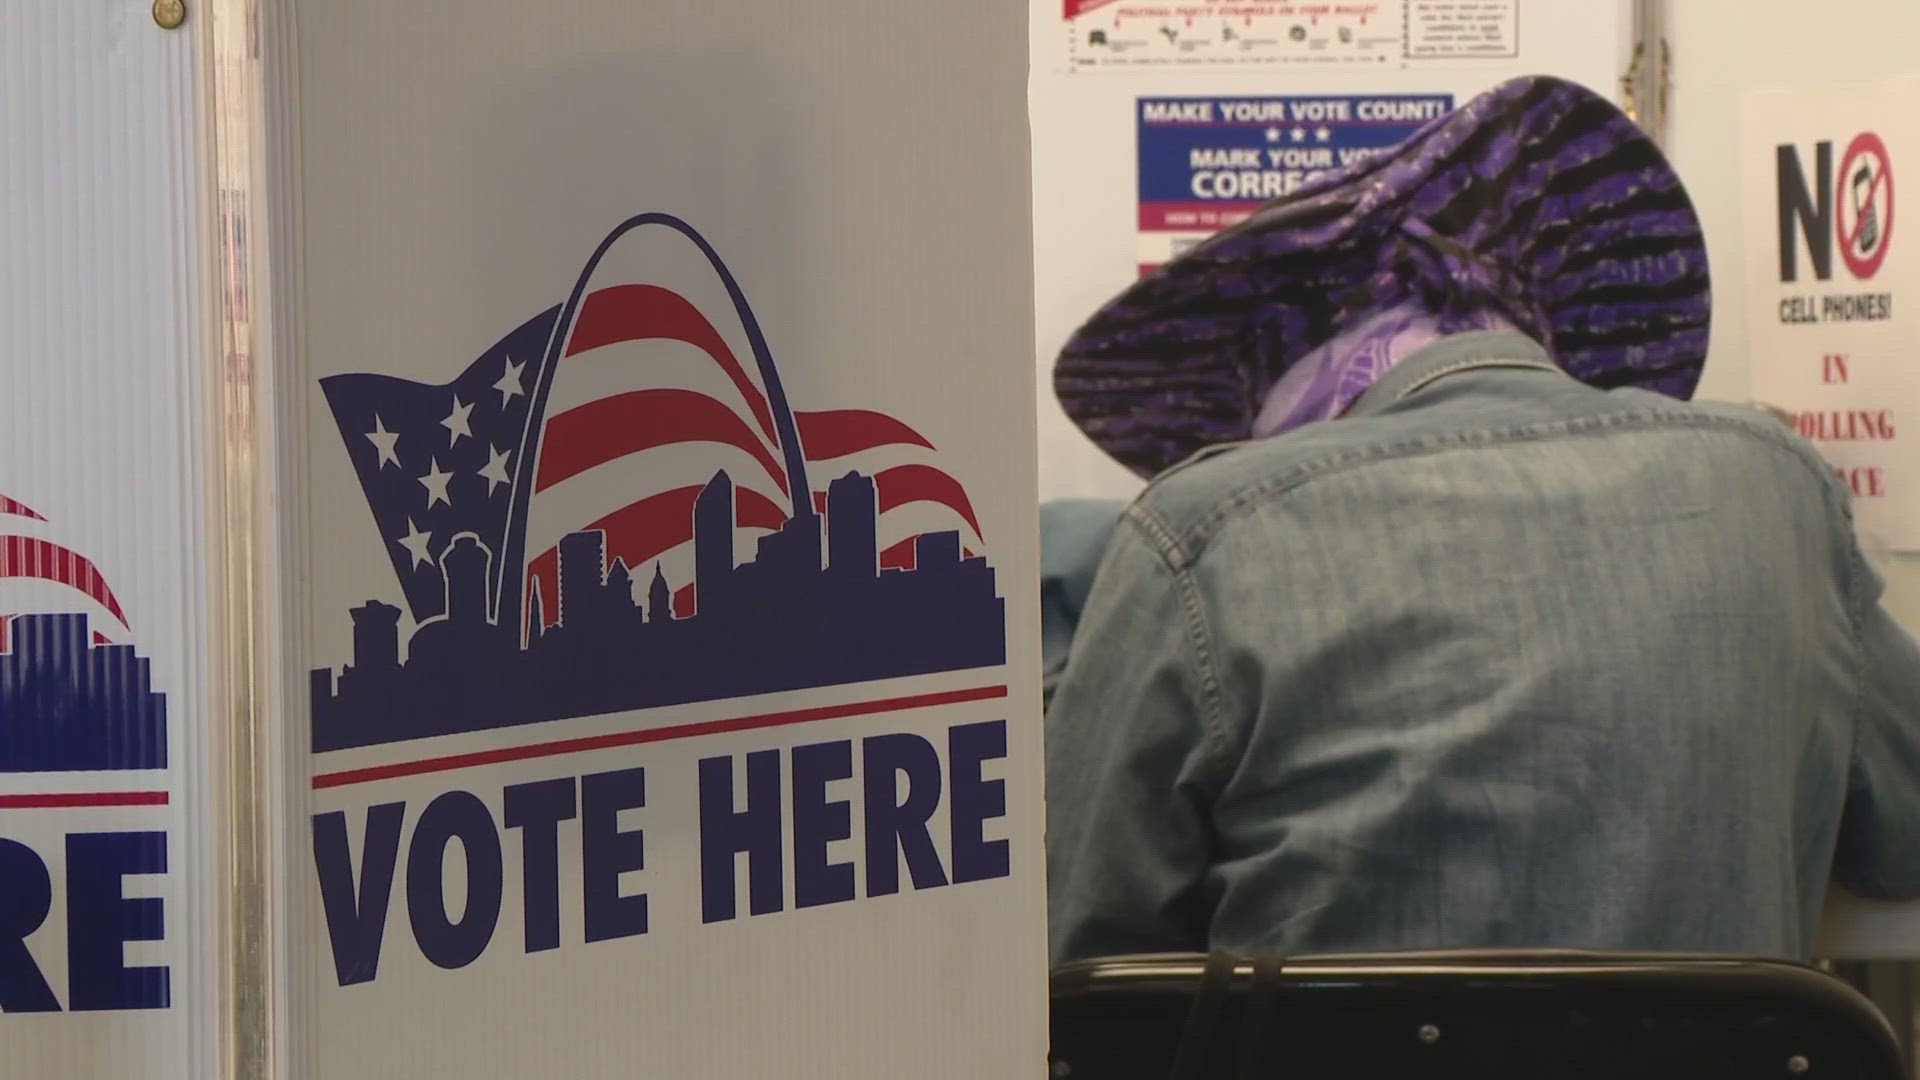 Some of the closest races to watch are for St. Louis aldermen. The race for 14th Ward got so intense that neither candidate showed up Monday to debate.